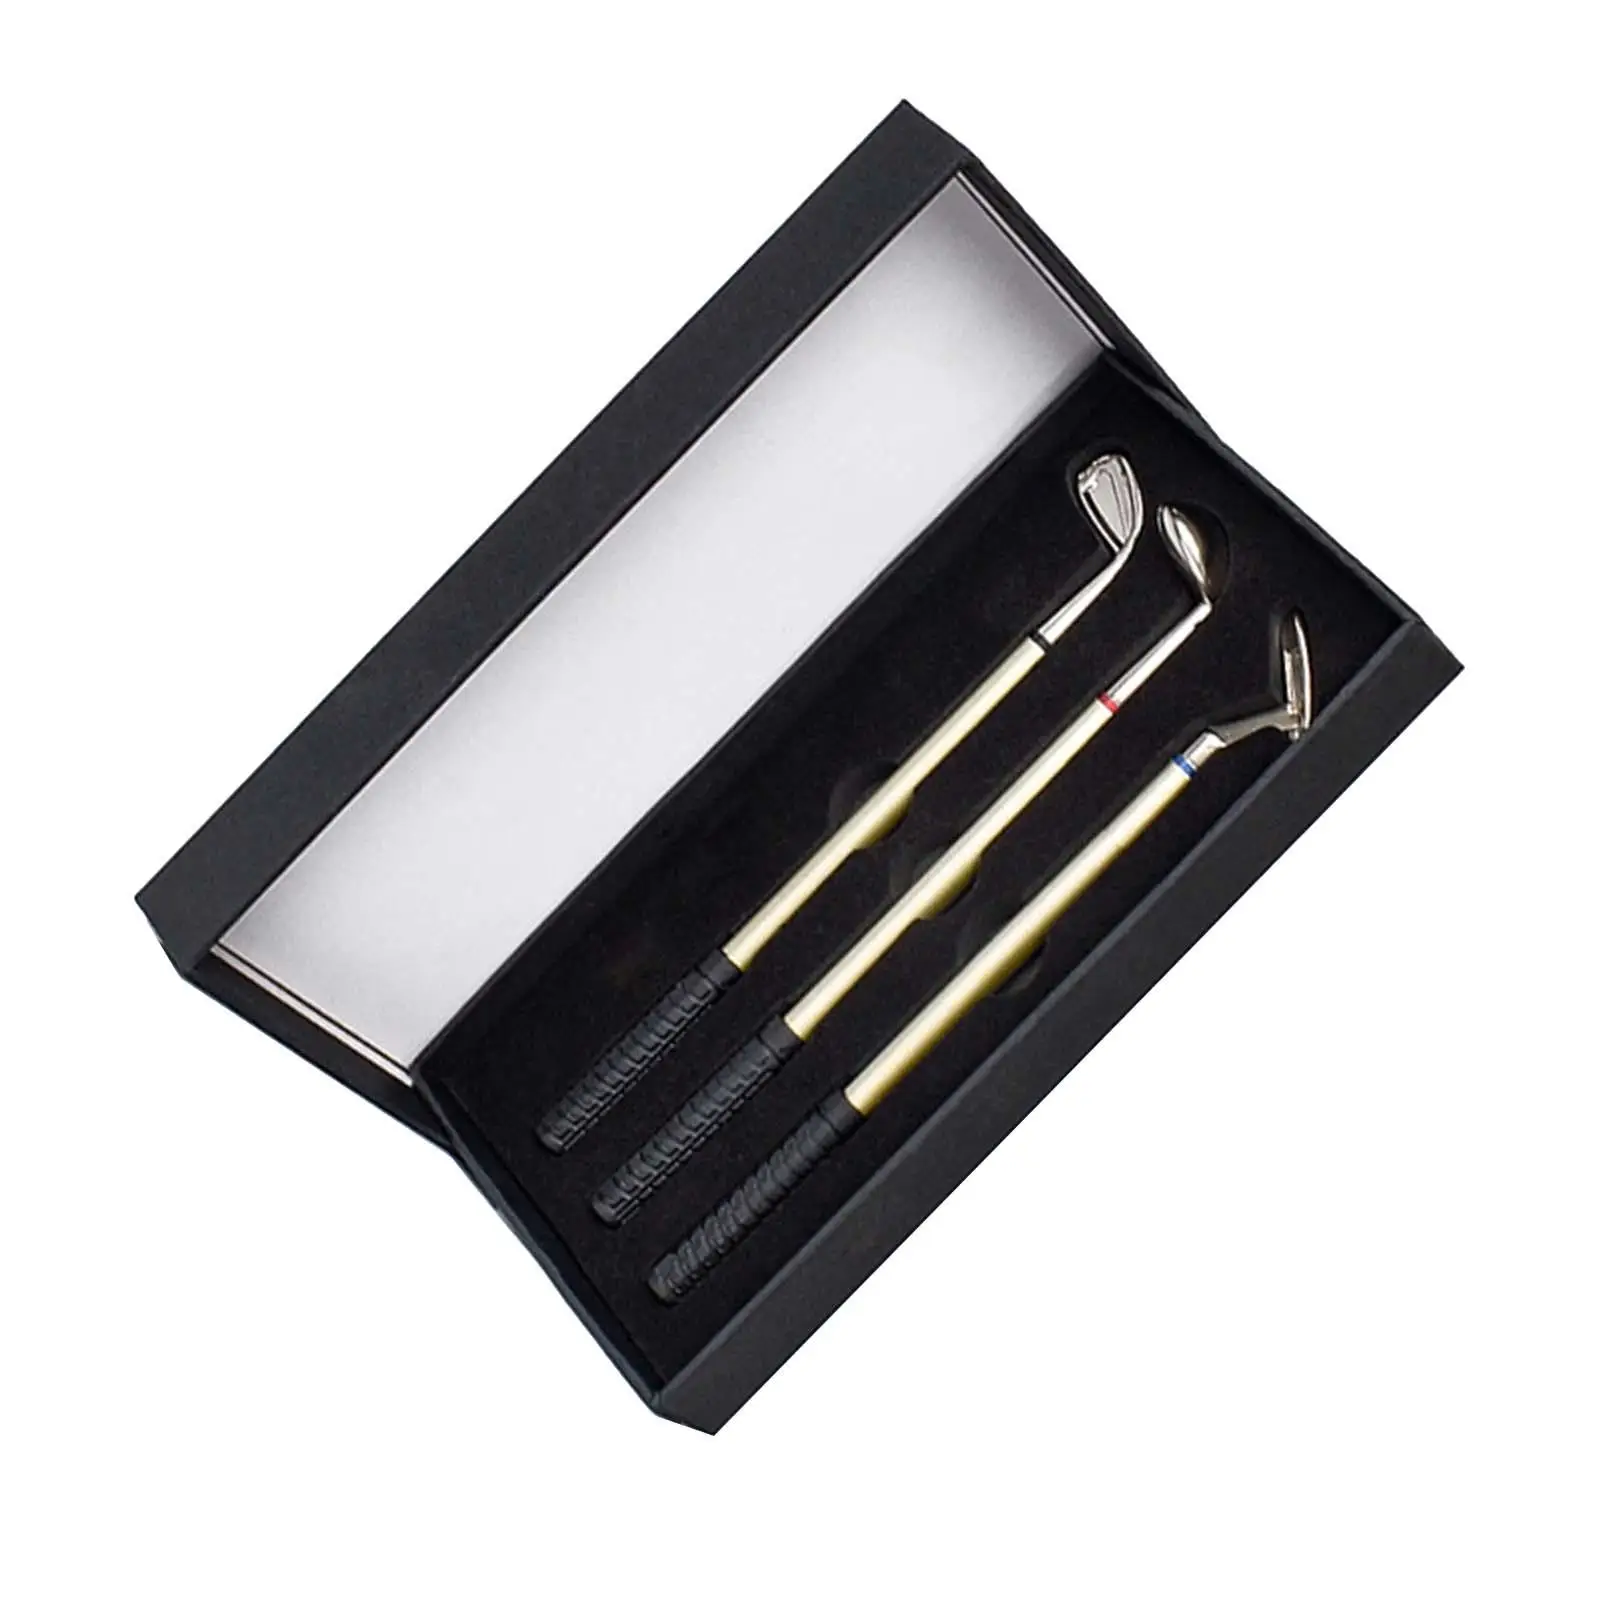 3 Pieces Golf Ballpoint Pen with Package Box Unique Decorative Stationery for Birthday Boyfriend Men and Woman Desktop Accessory